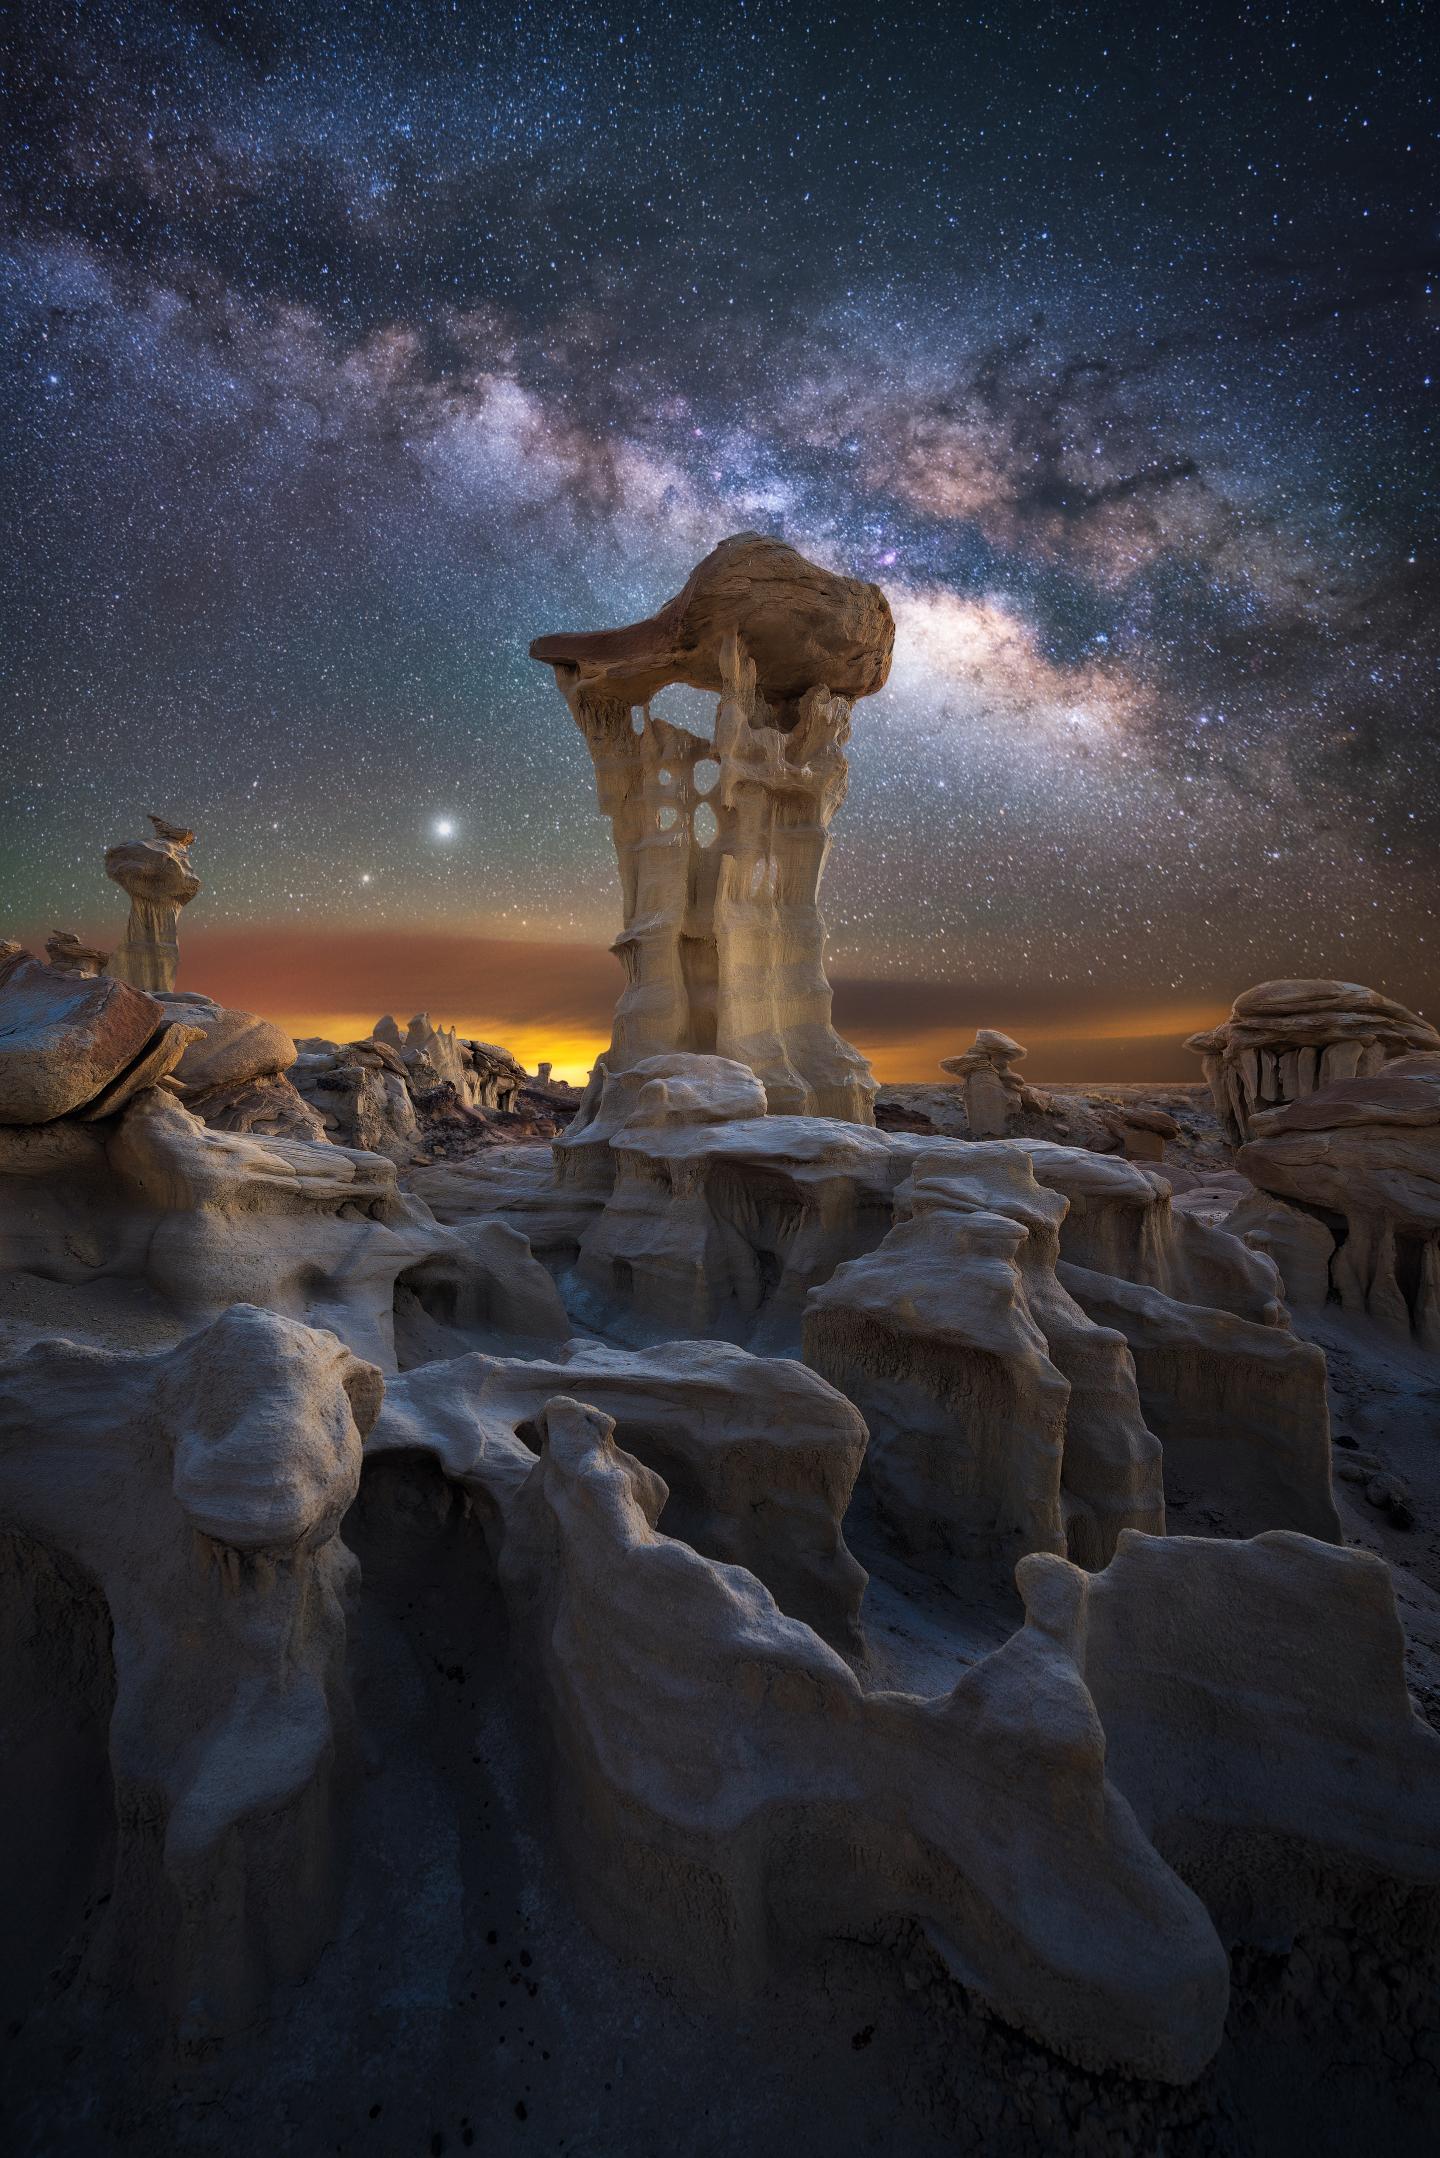 Pillar of rock in New Mexico with Milky Way in background